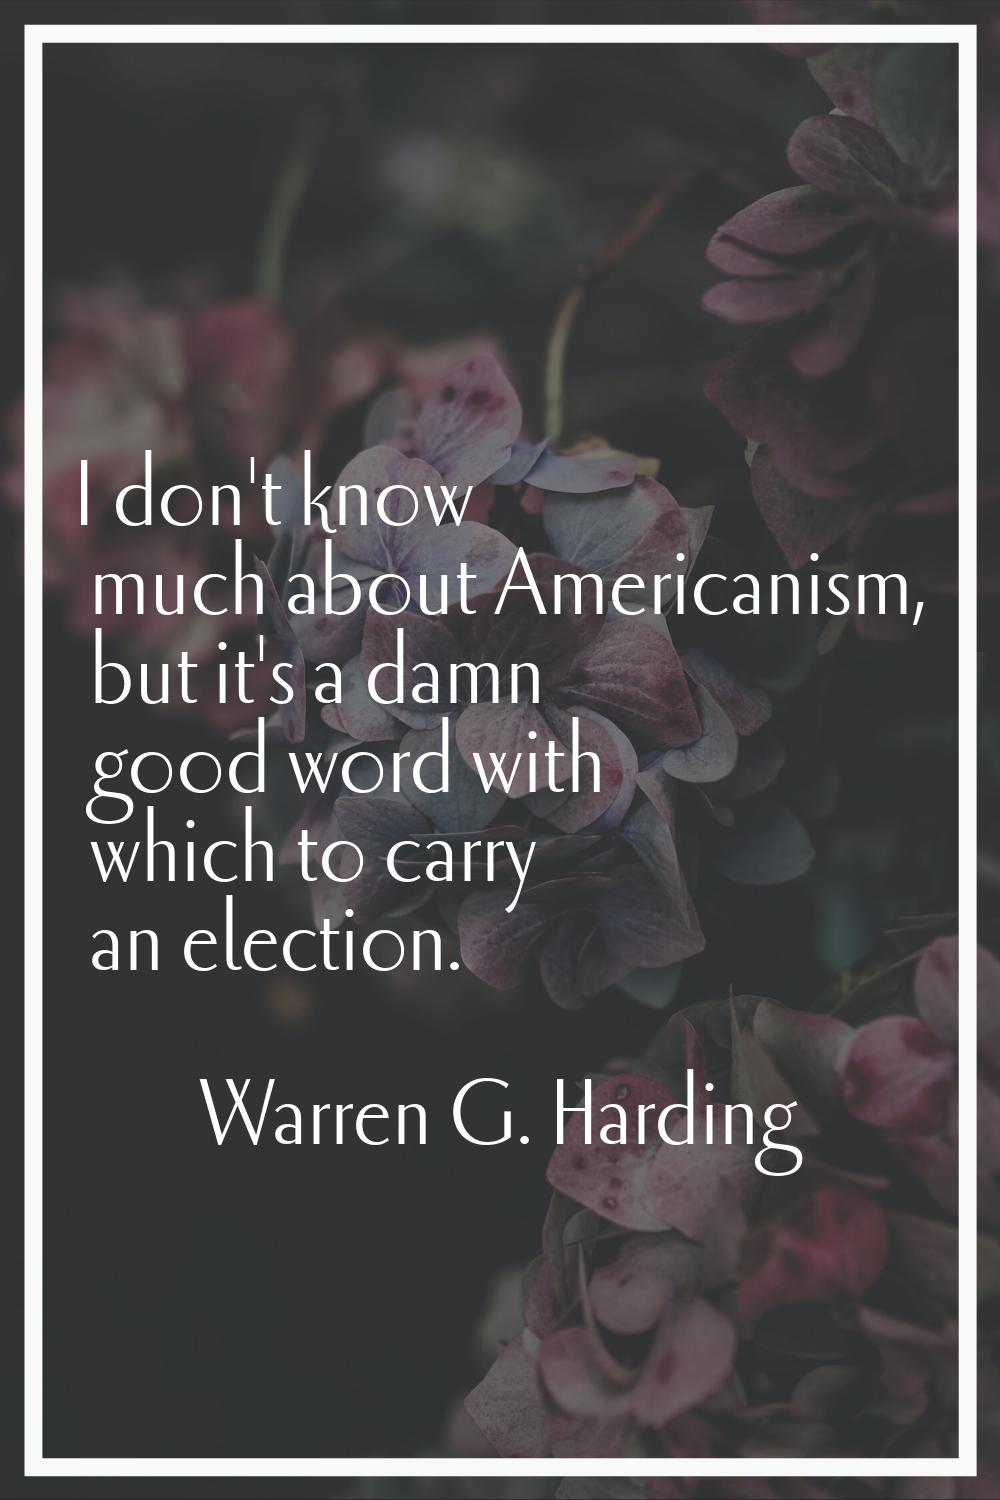 I don't know much about Americanism, but it's a damn good word with which to carry an election.